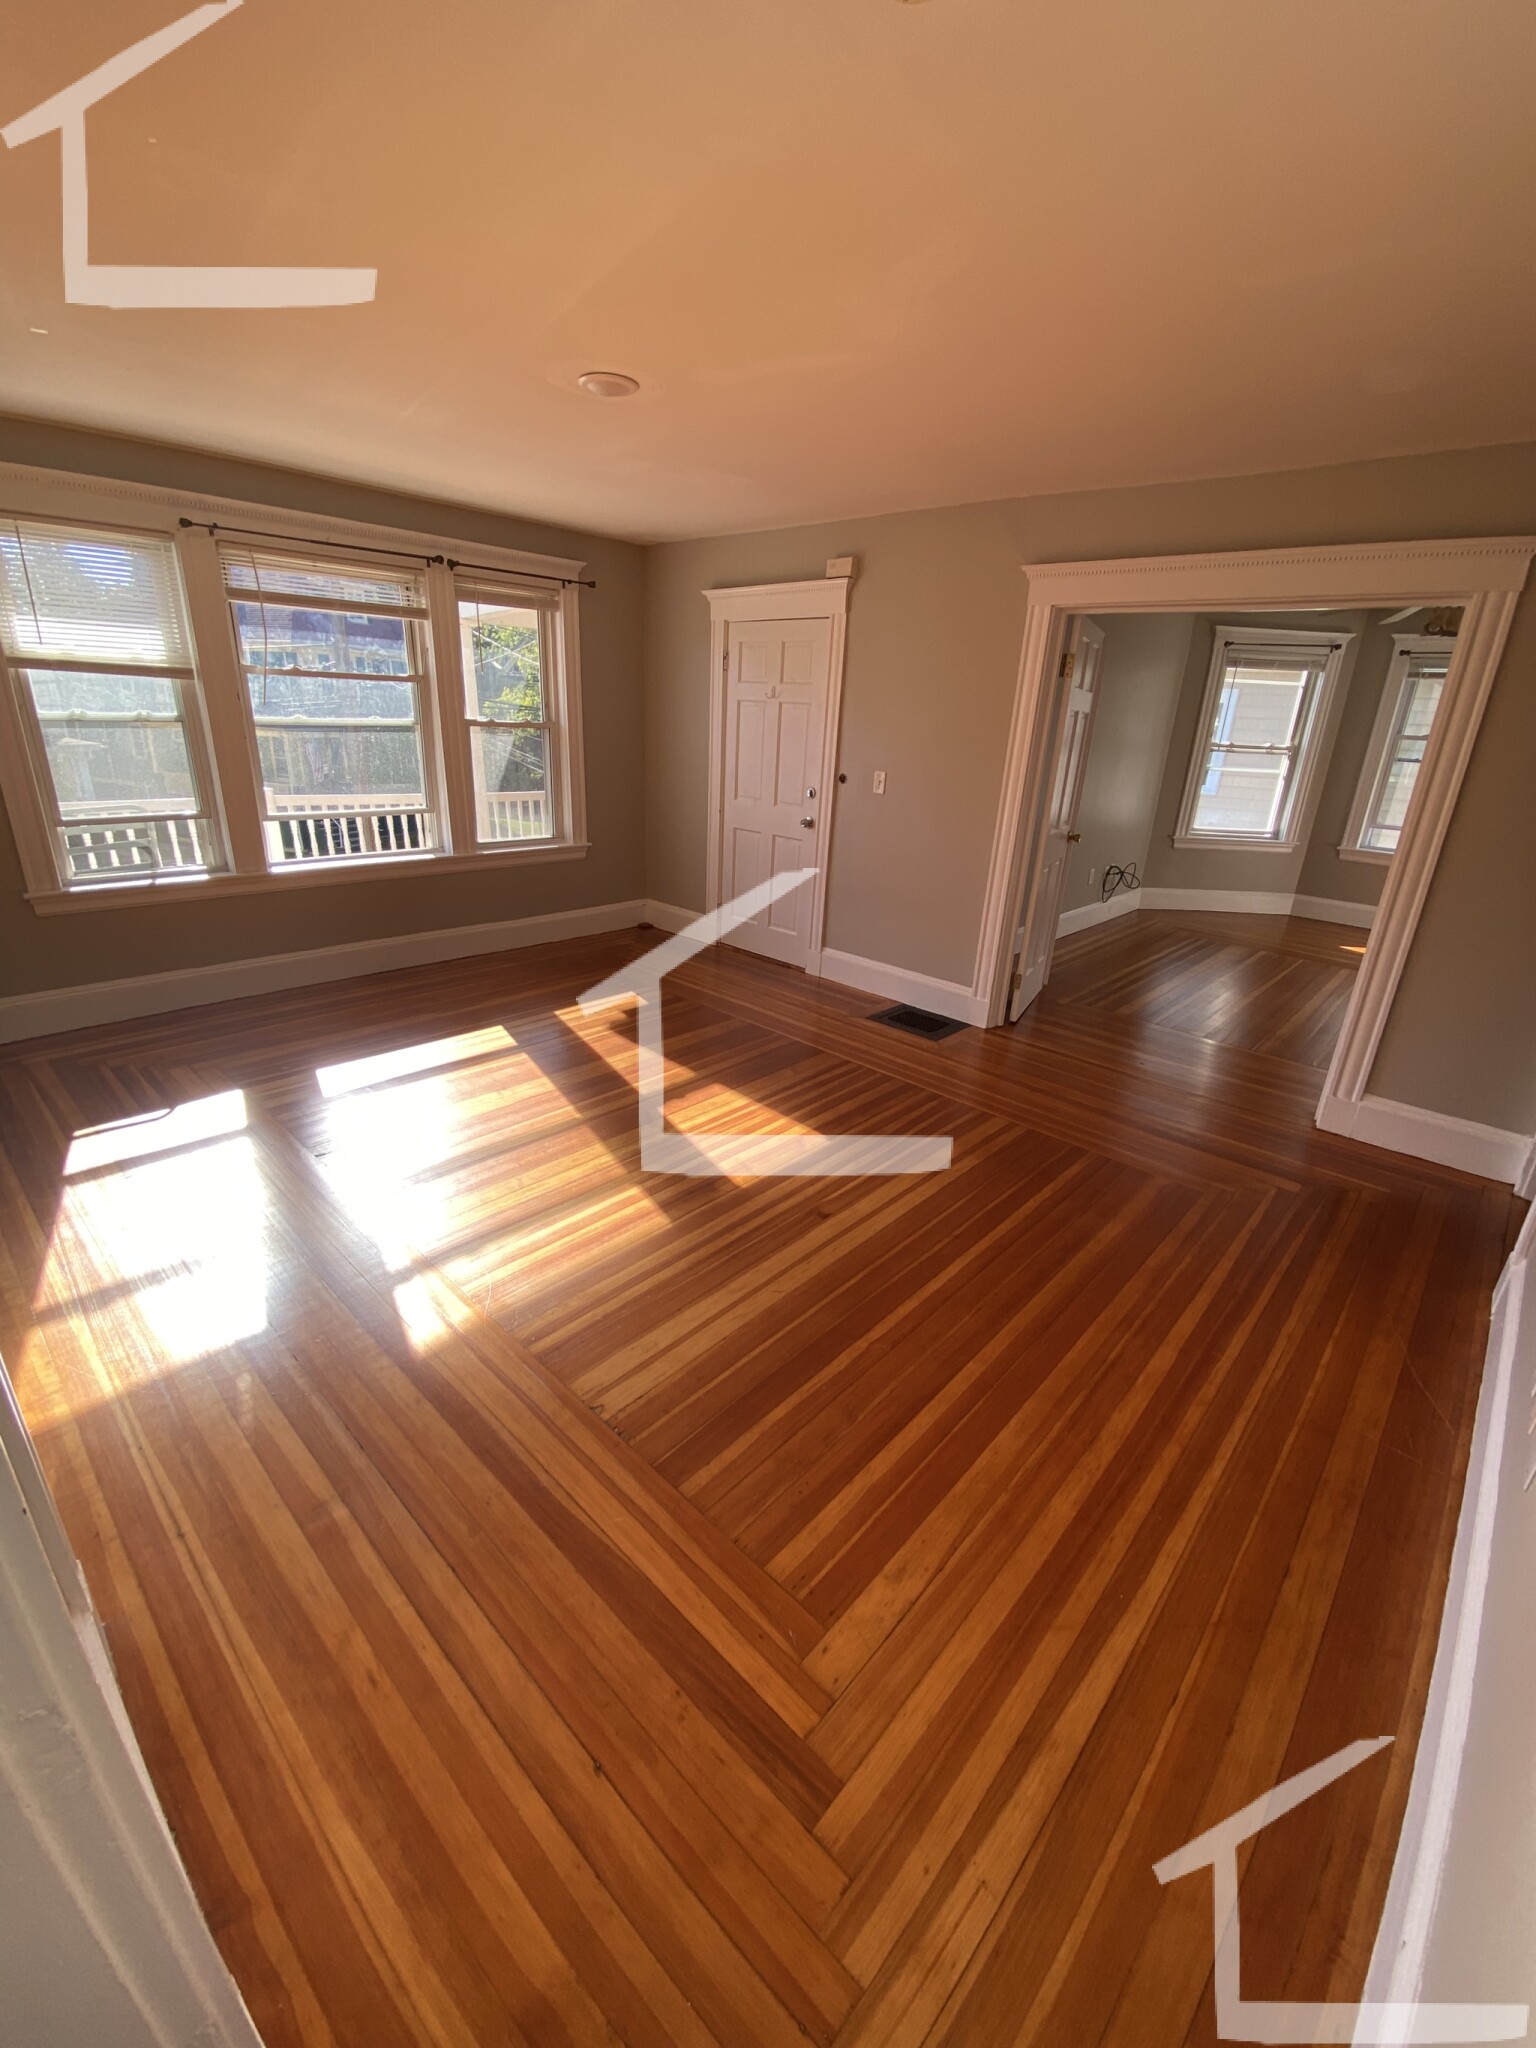 Photos of apartment on Independence Ave.,Quincy MA 02169